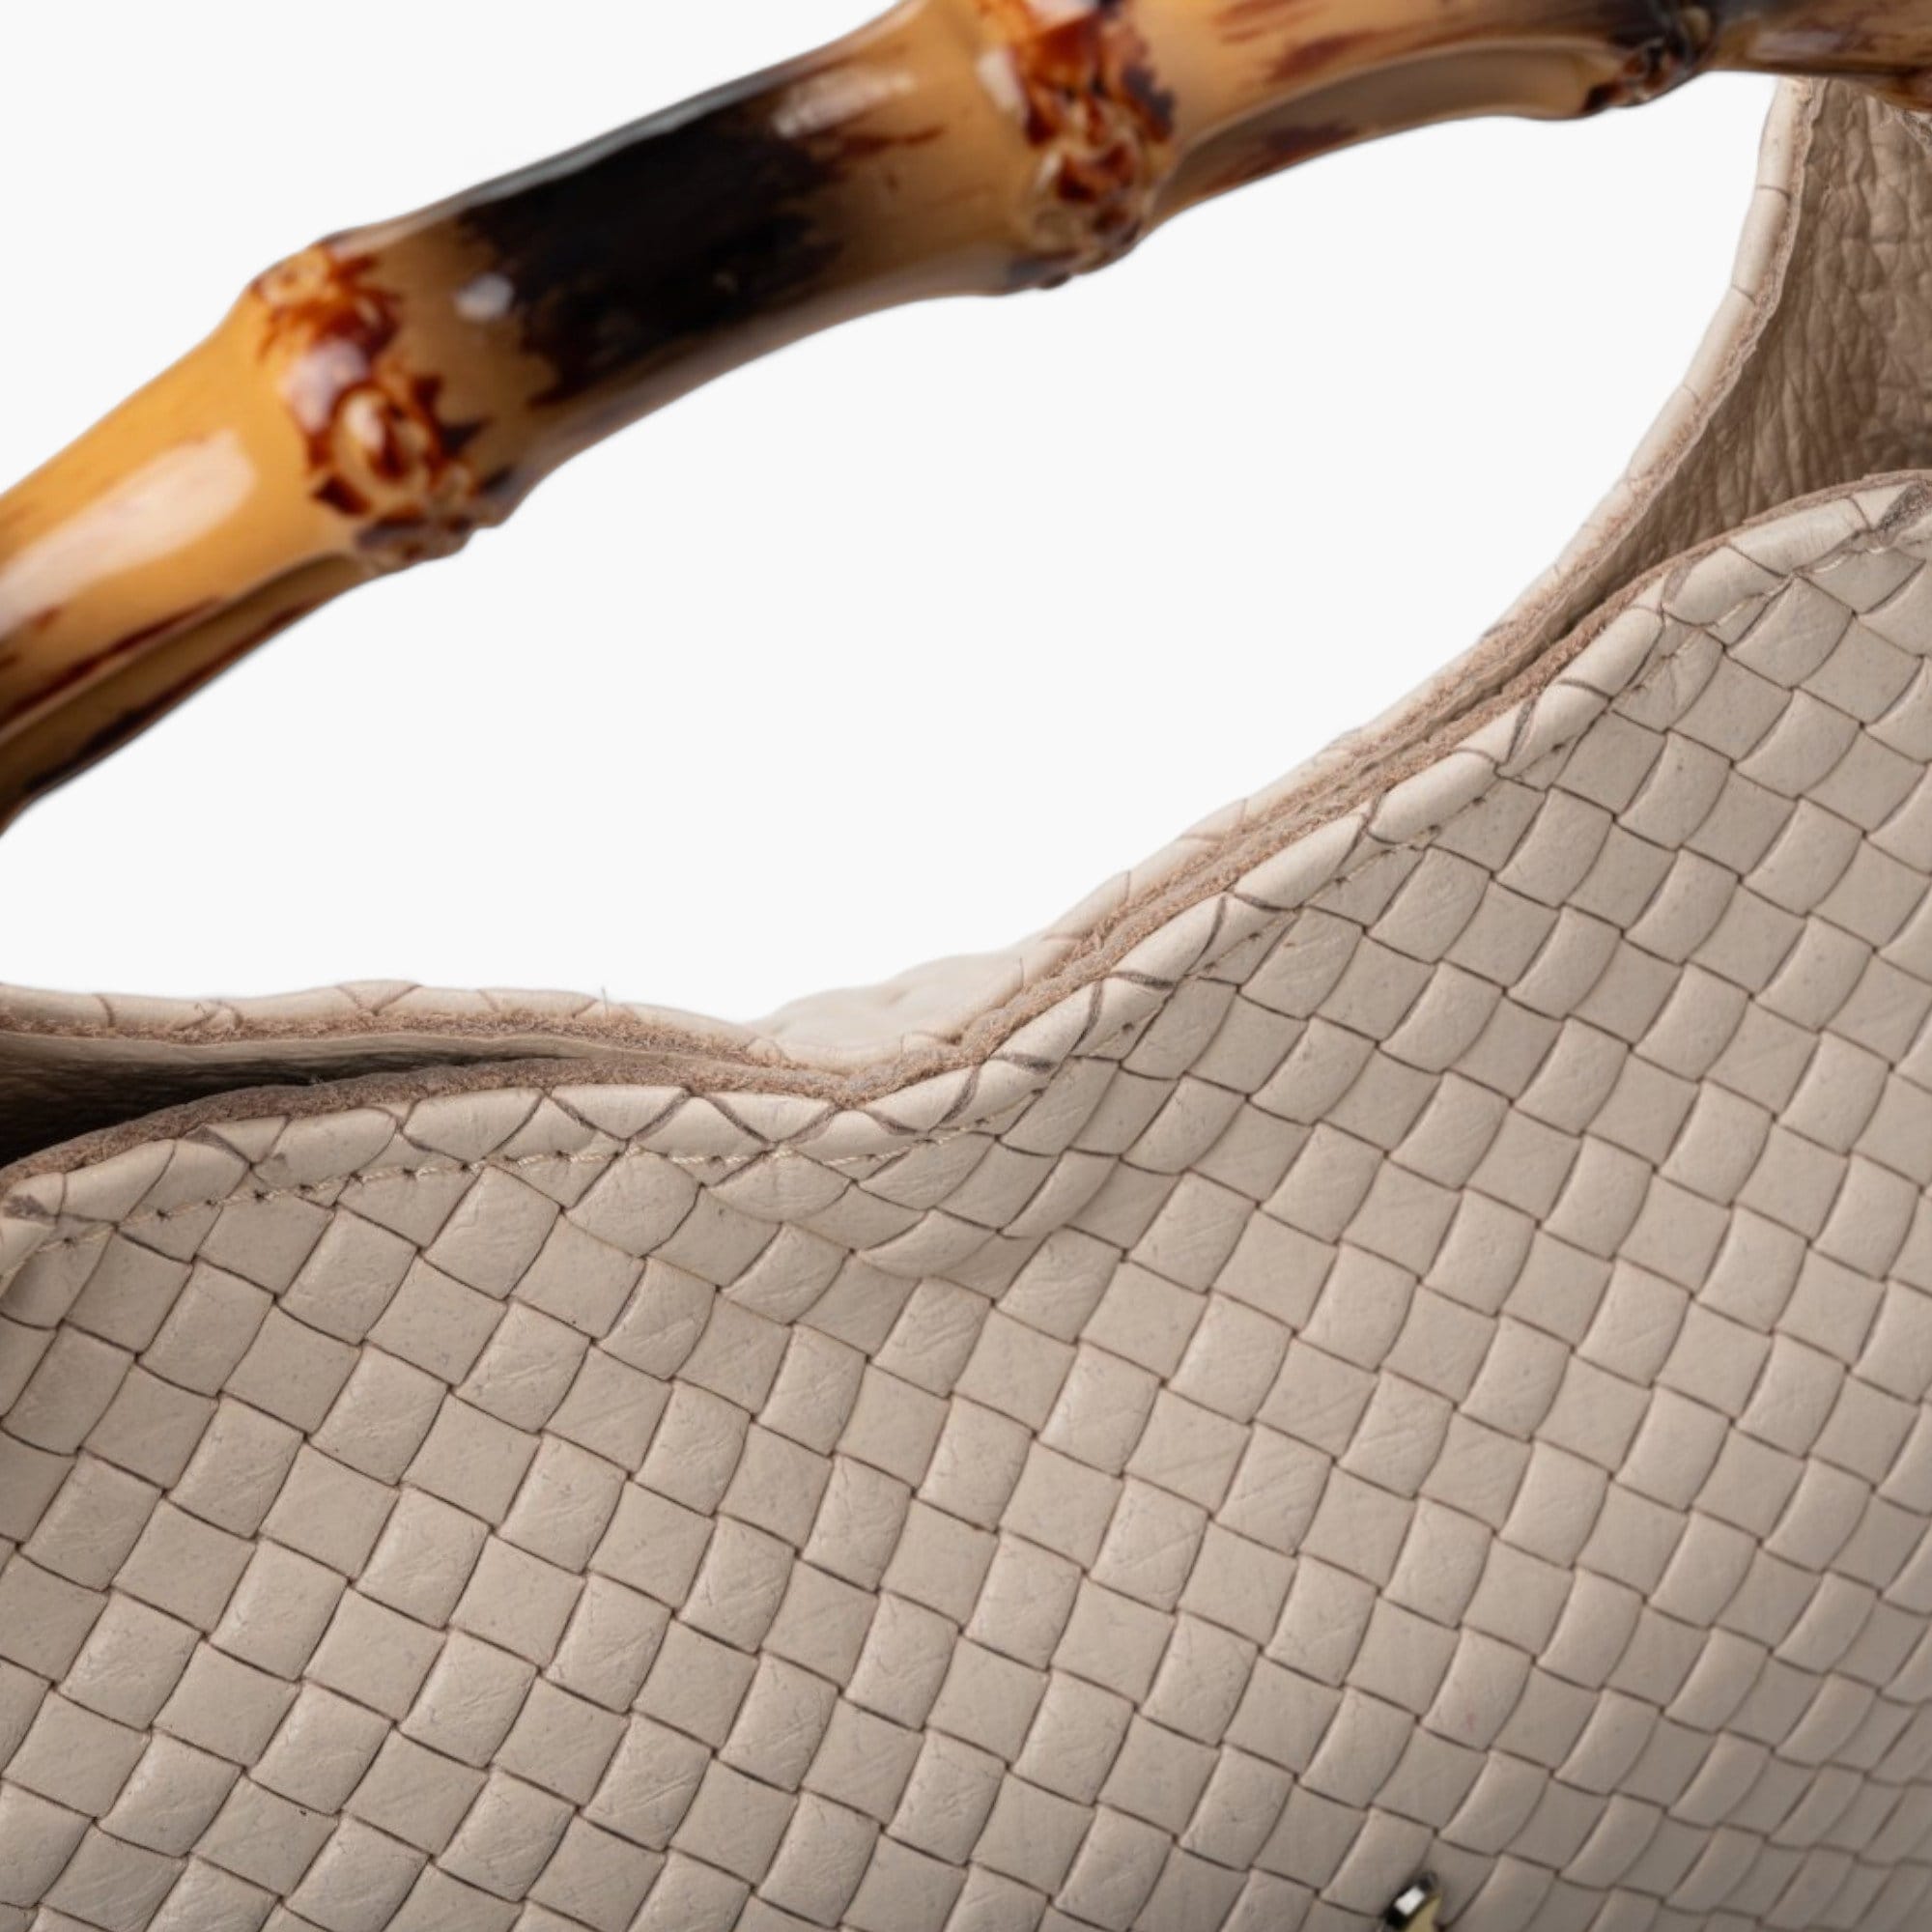 Leather bag with a detachable strap in beige color